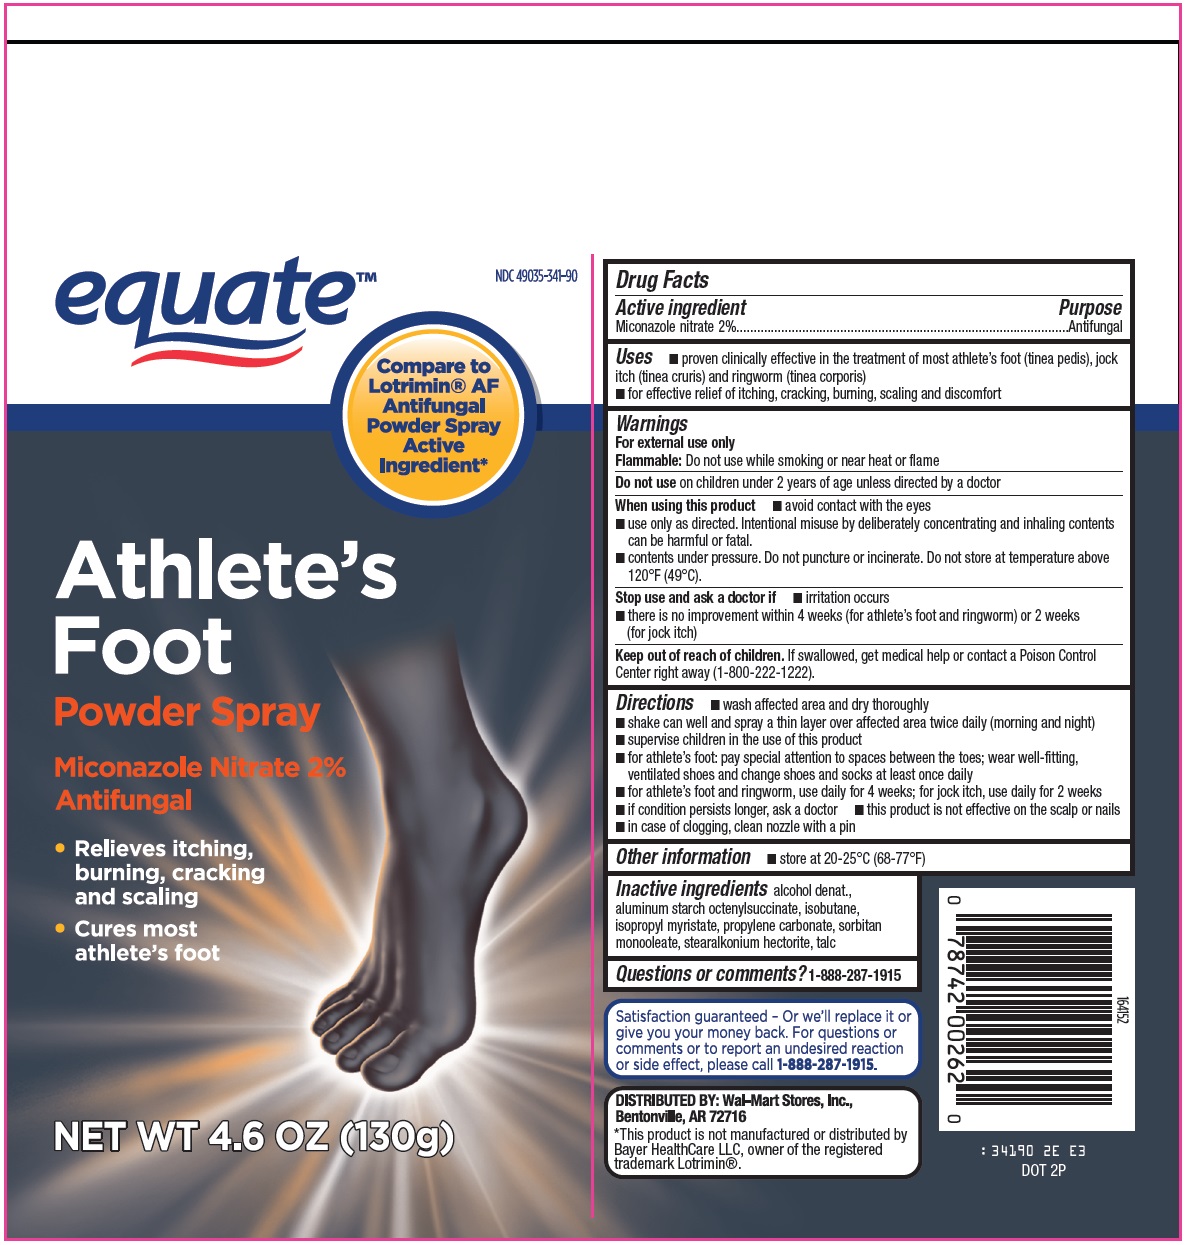 Equate Athlete's Foot